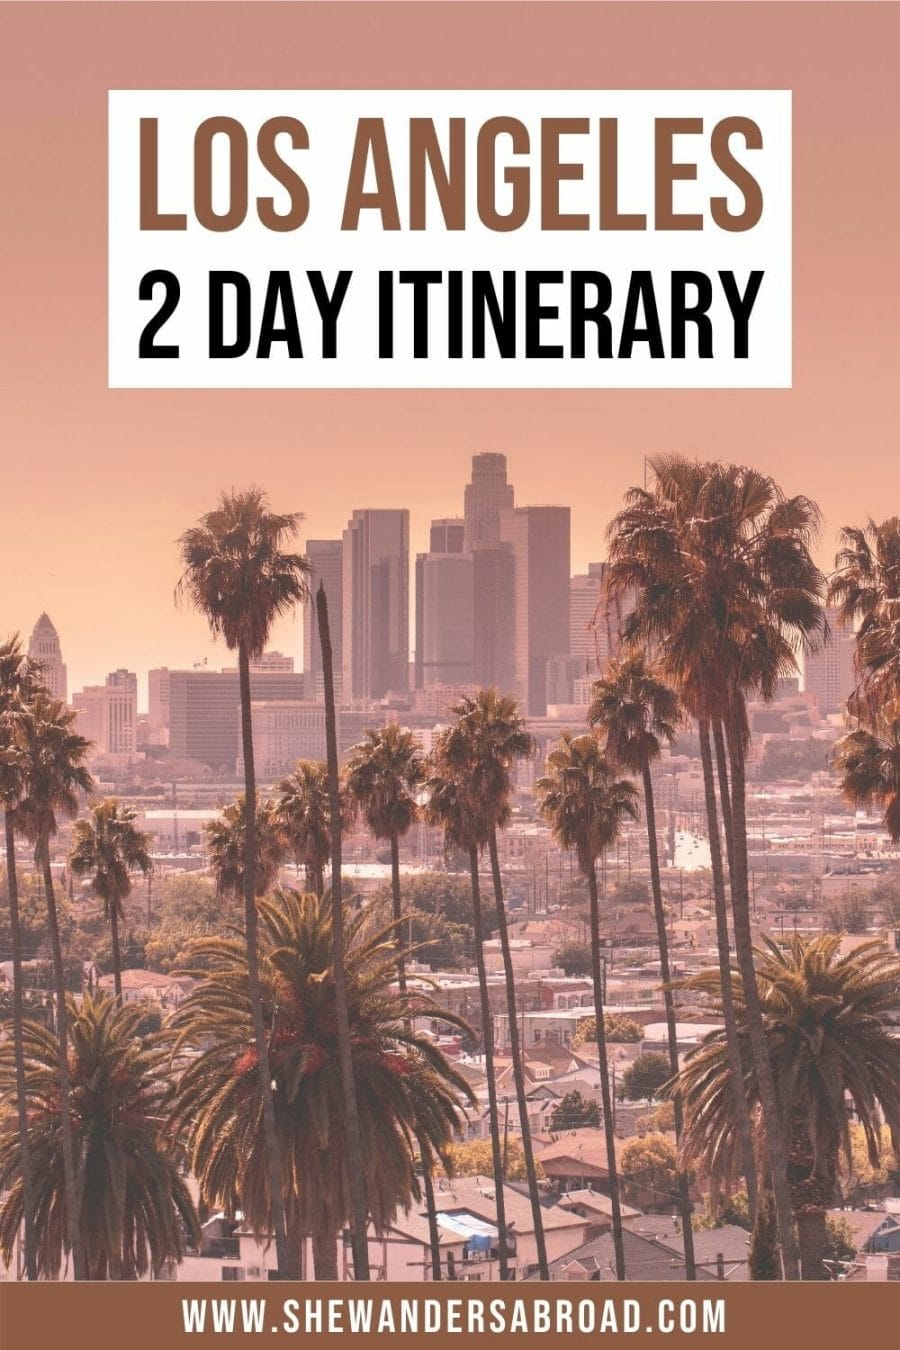 2 Days in Los Angeles: Best Things to do in LA in 2 days